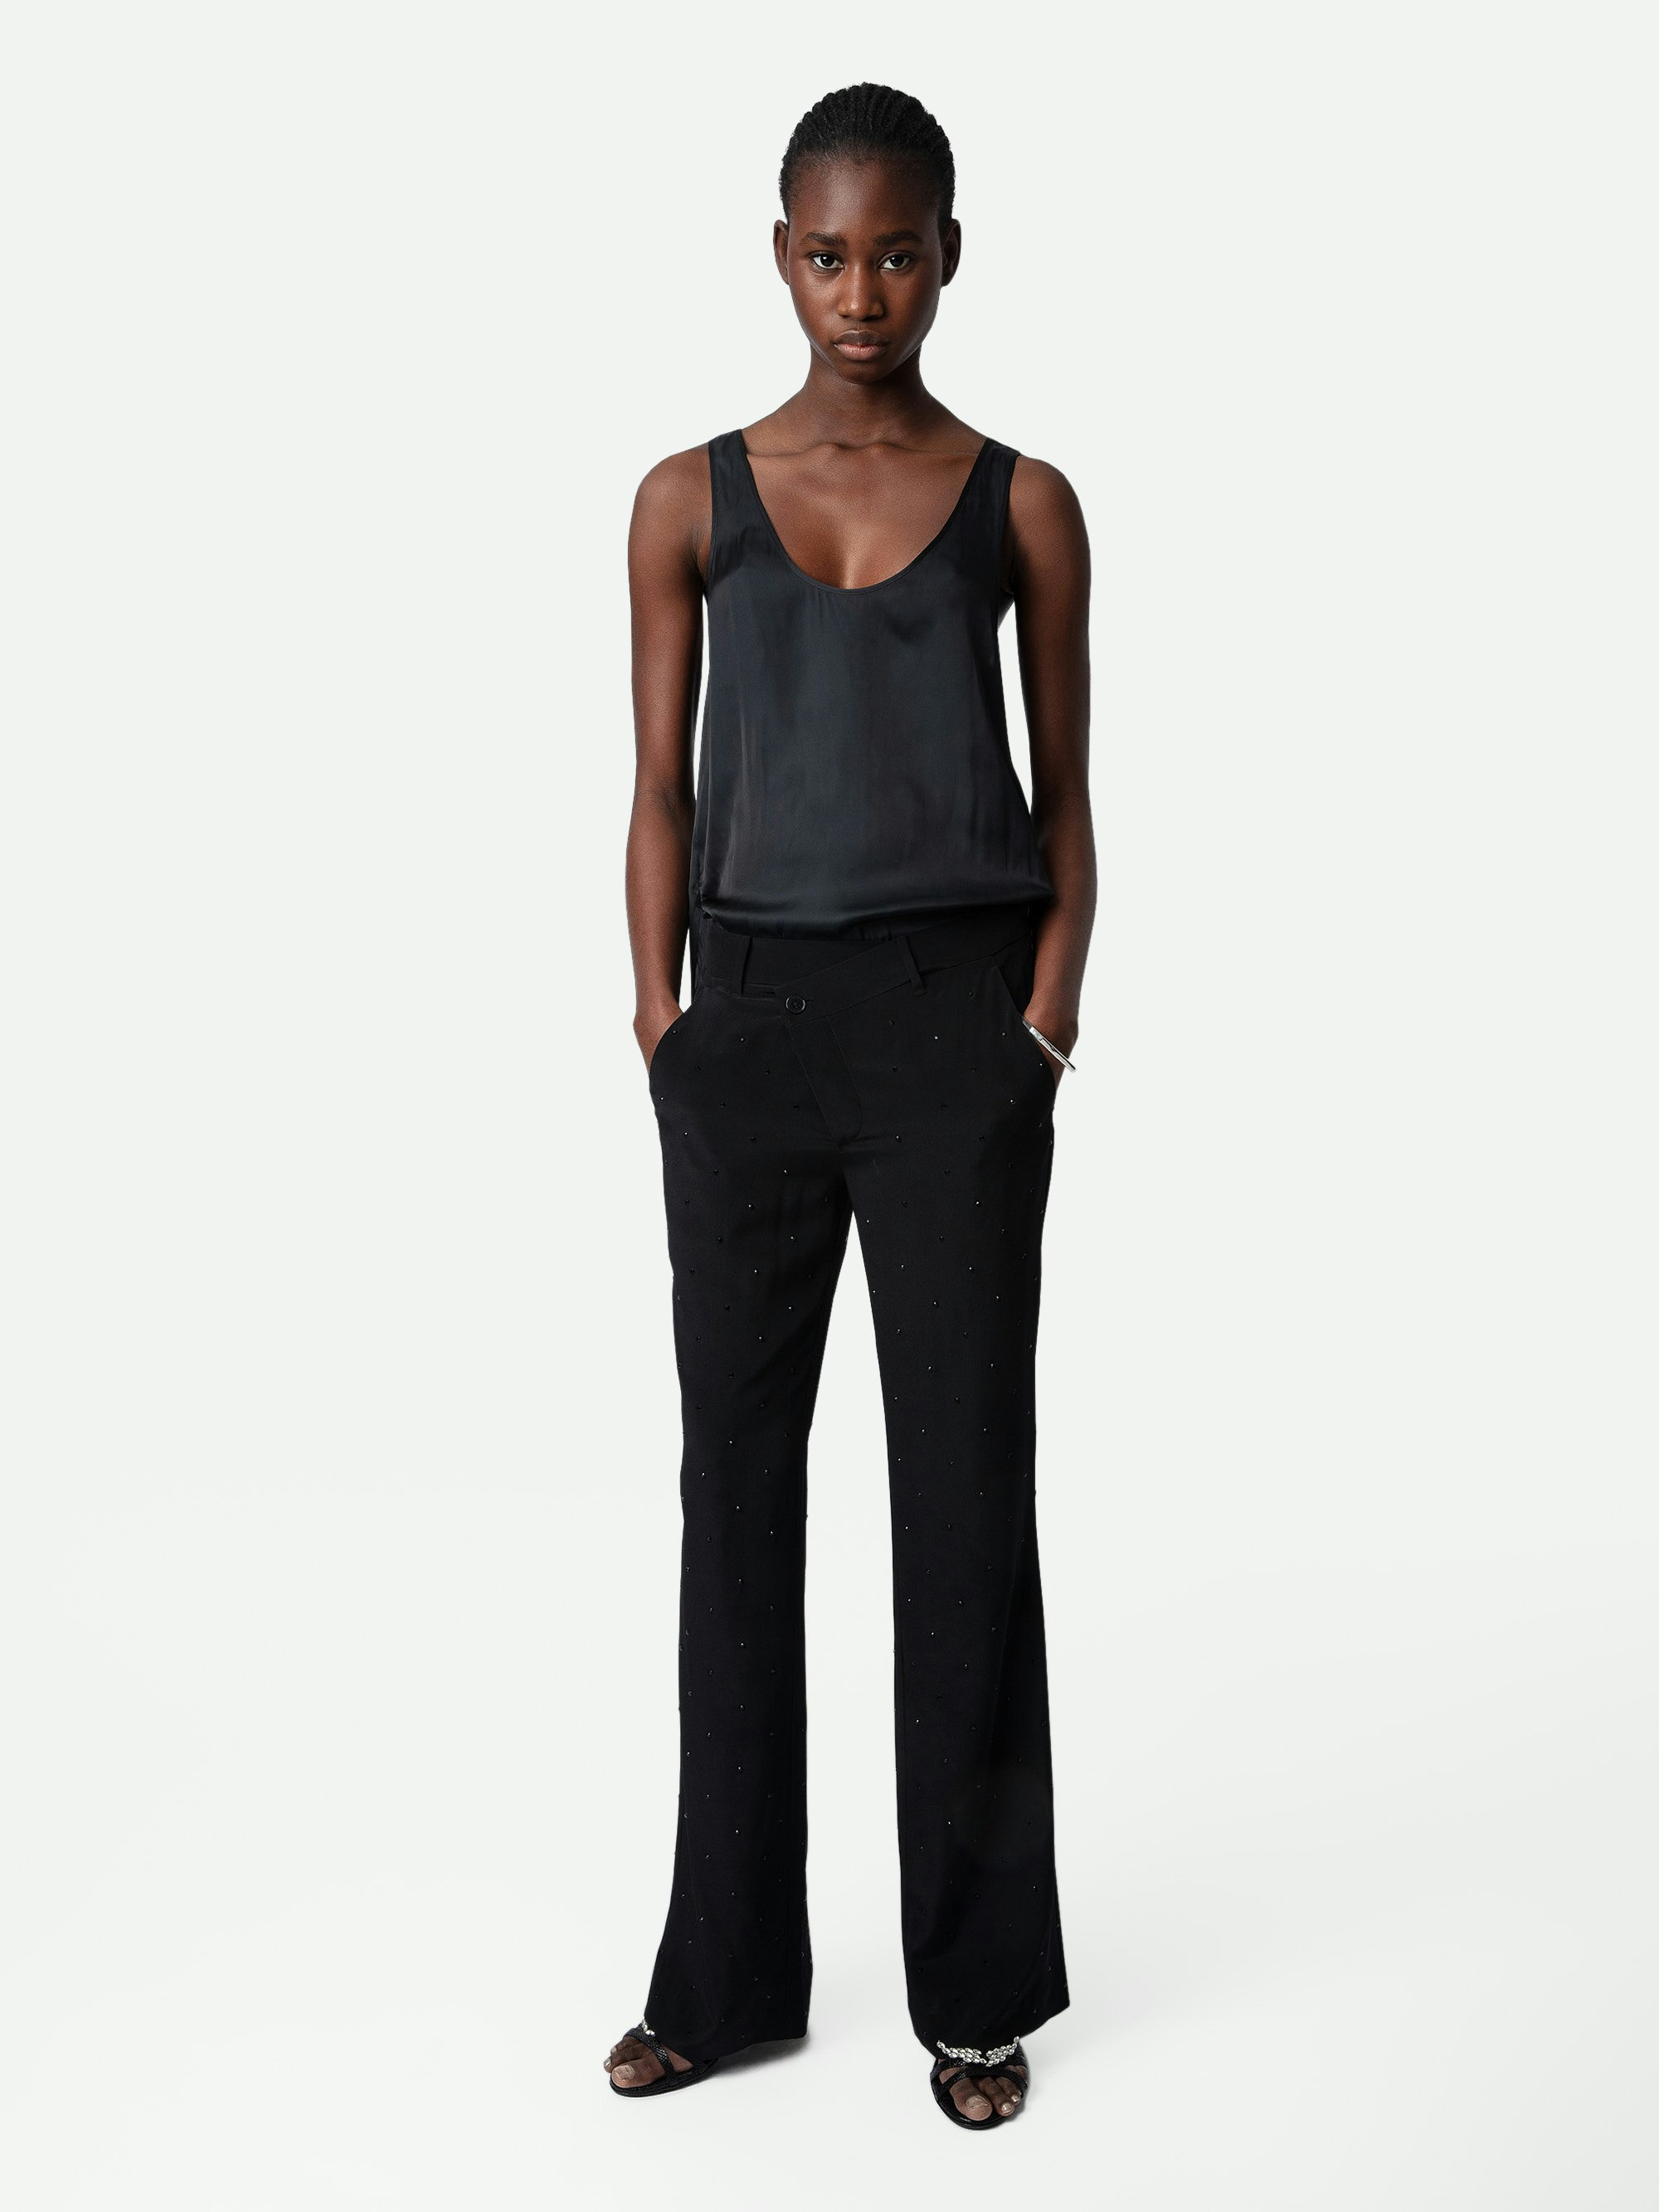 Poxy Silk Pants - Black silk tailored pants with diamanté and asymmetric fastening.